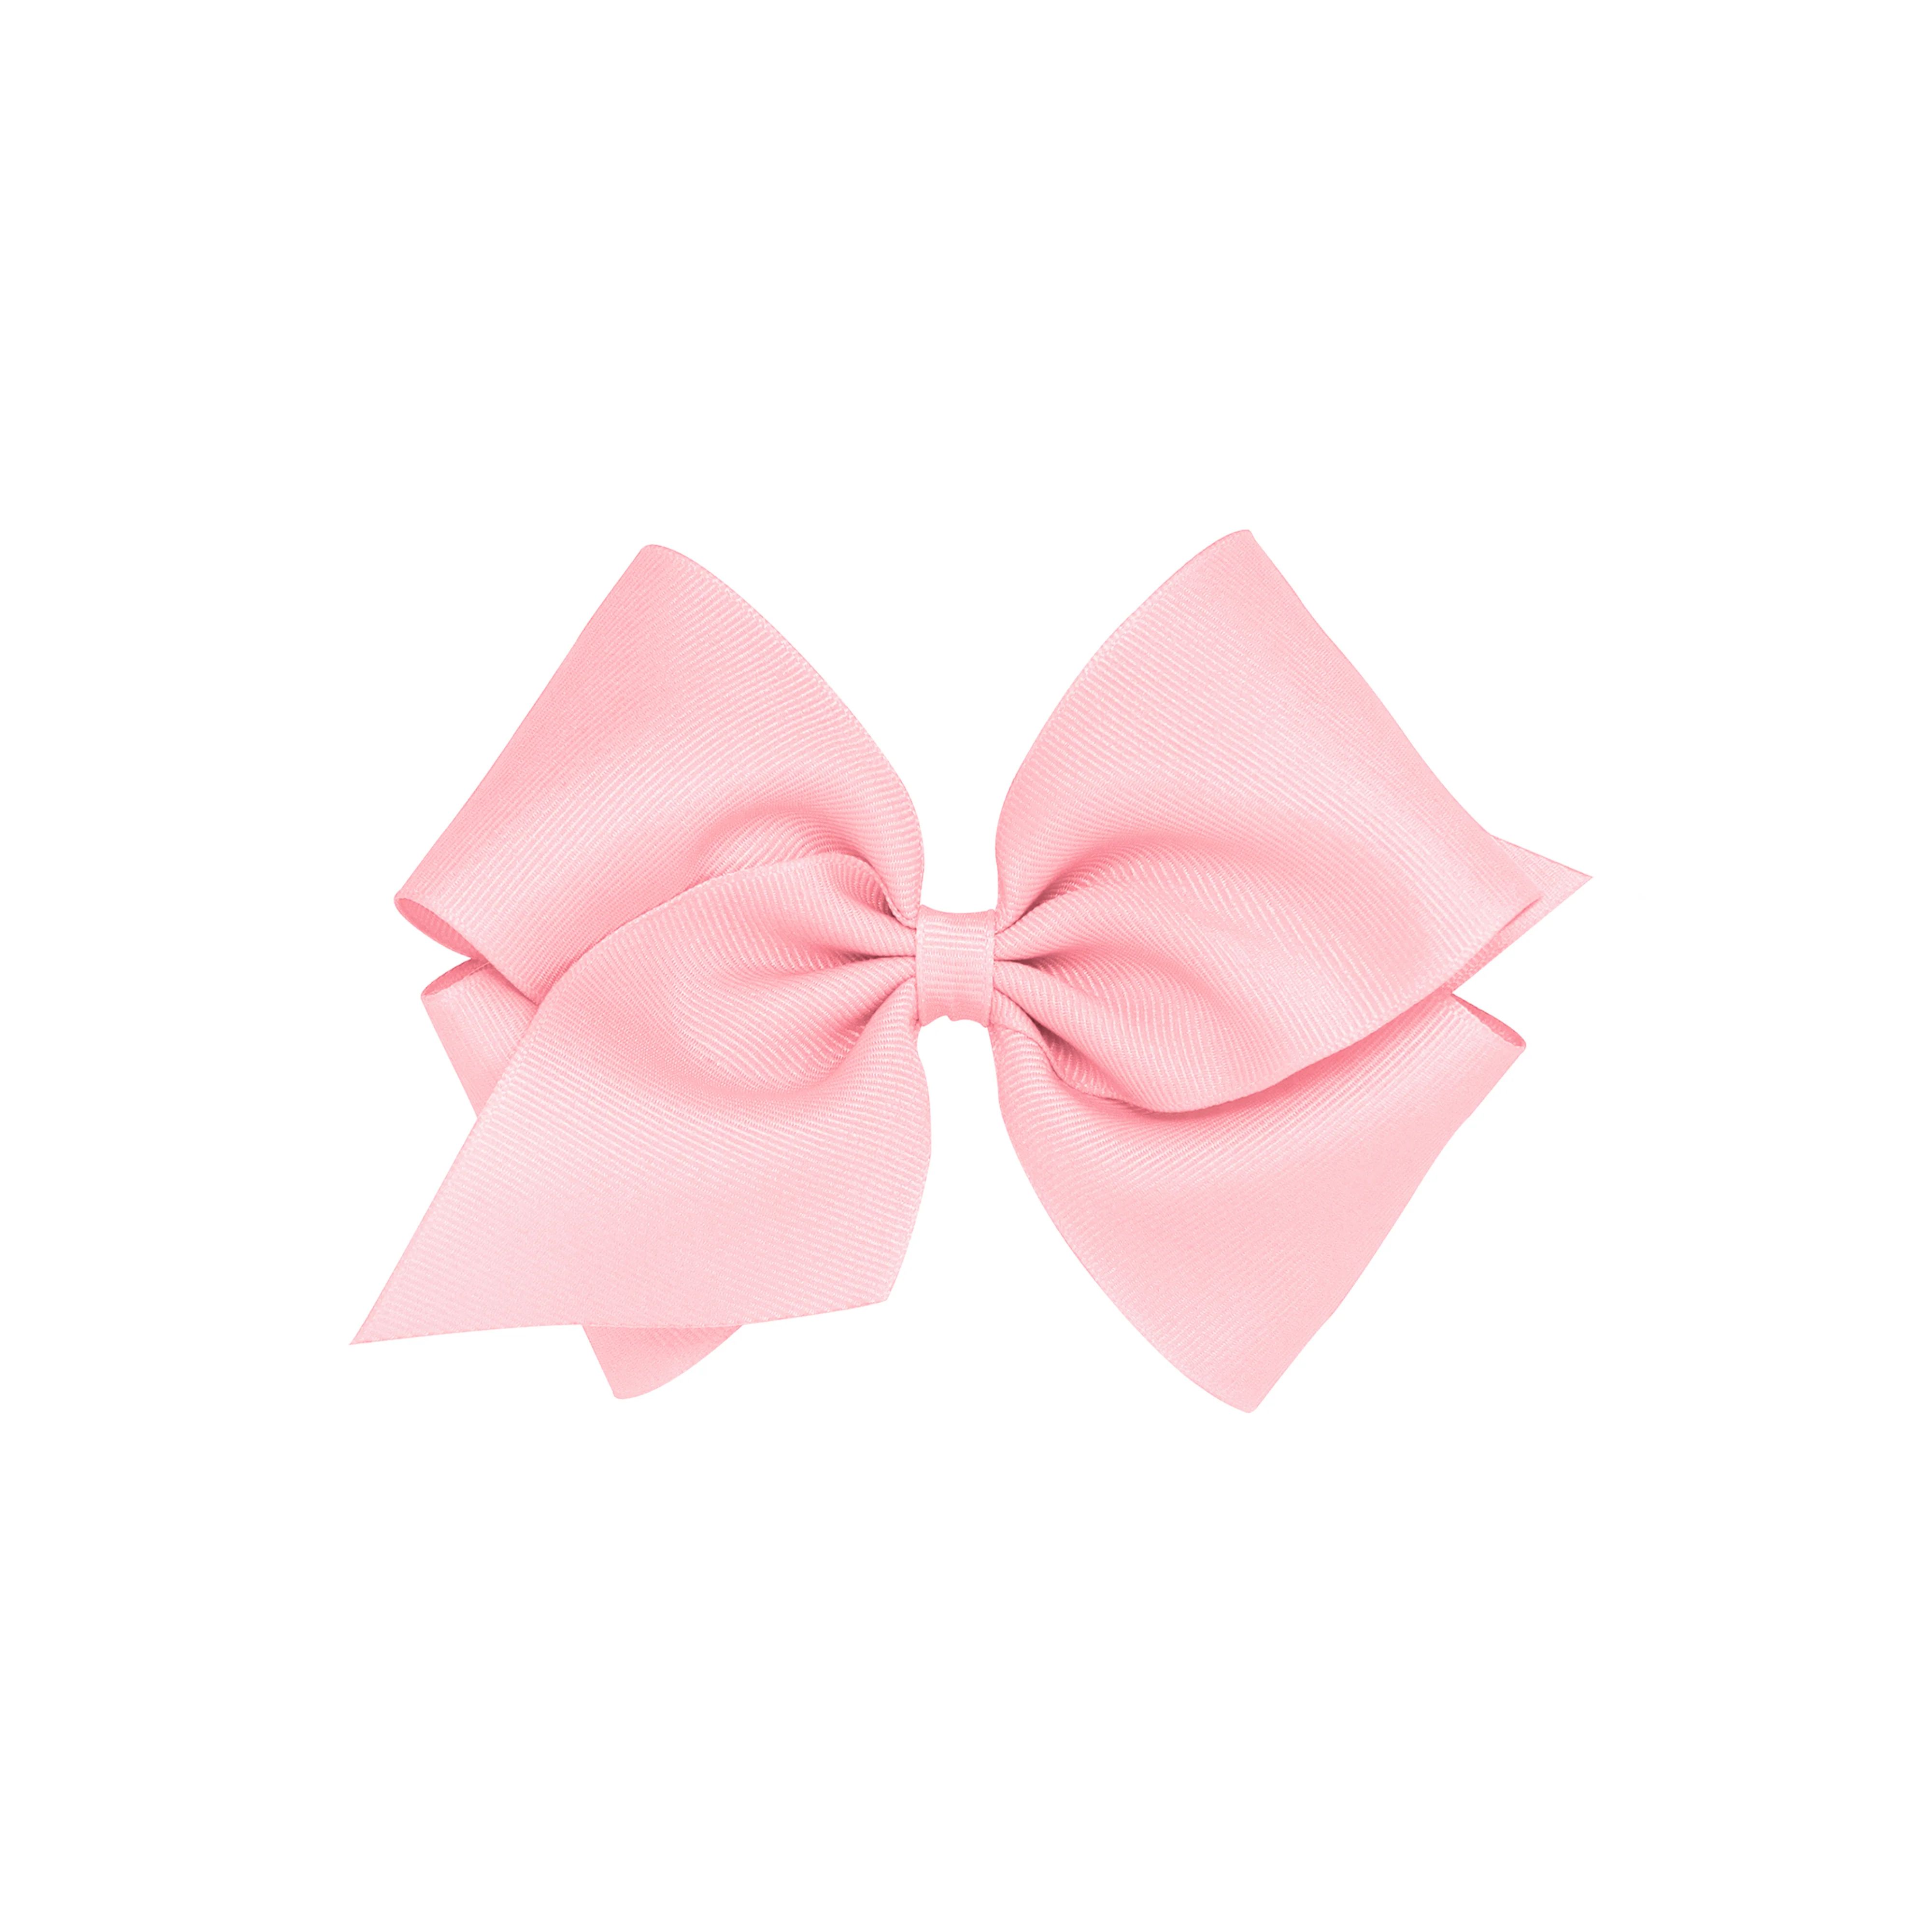 Wee Ones Hair Bow - Palm Beach Pink | The Beaufort Bonnet Company